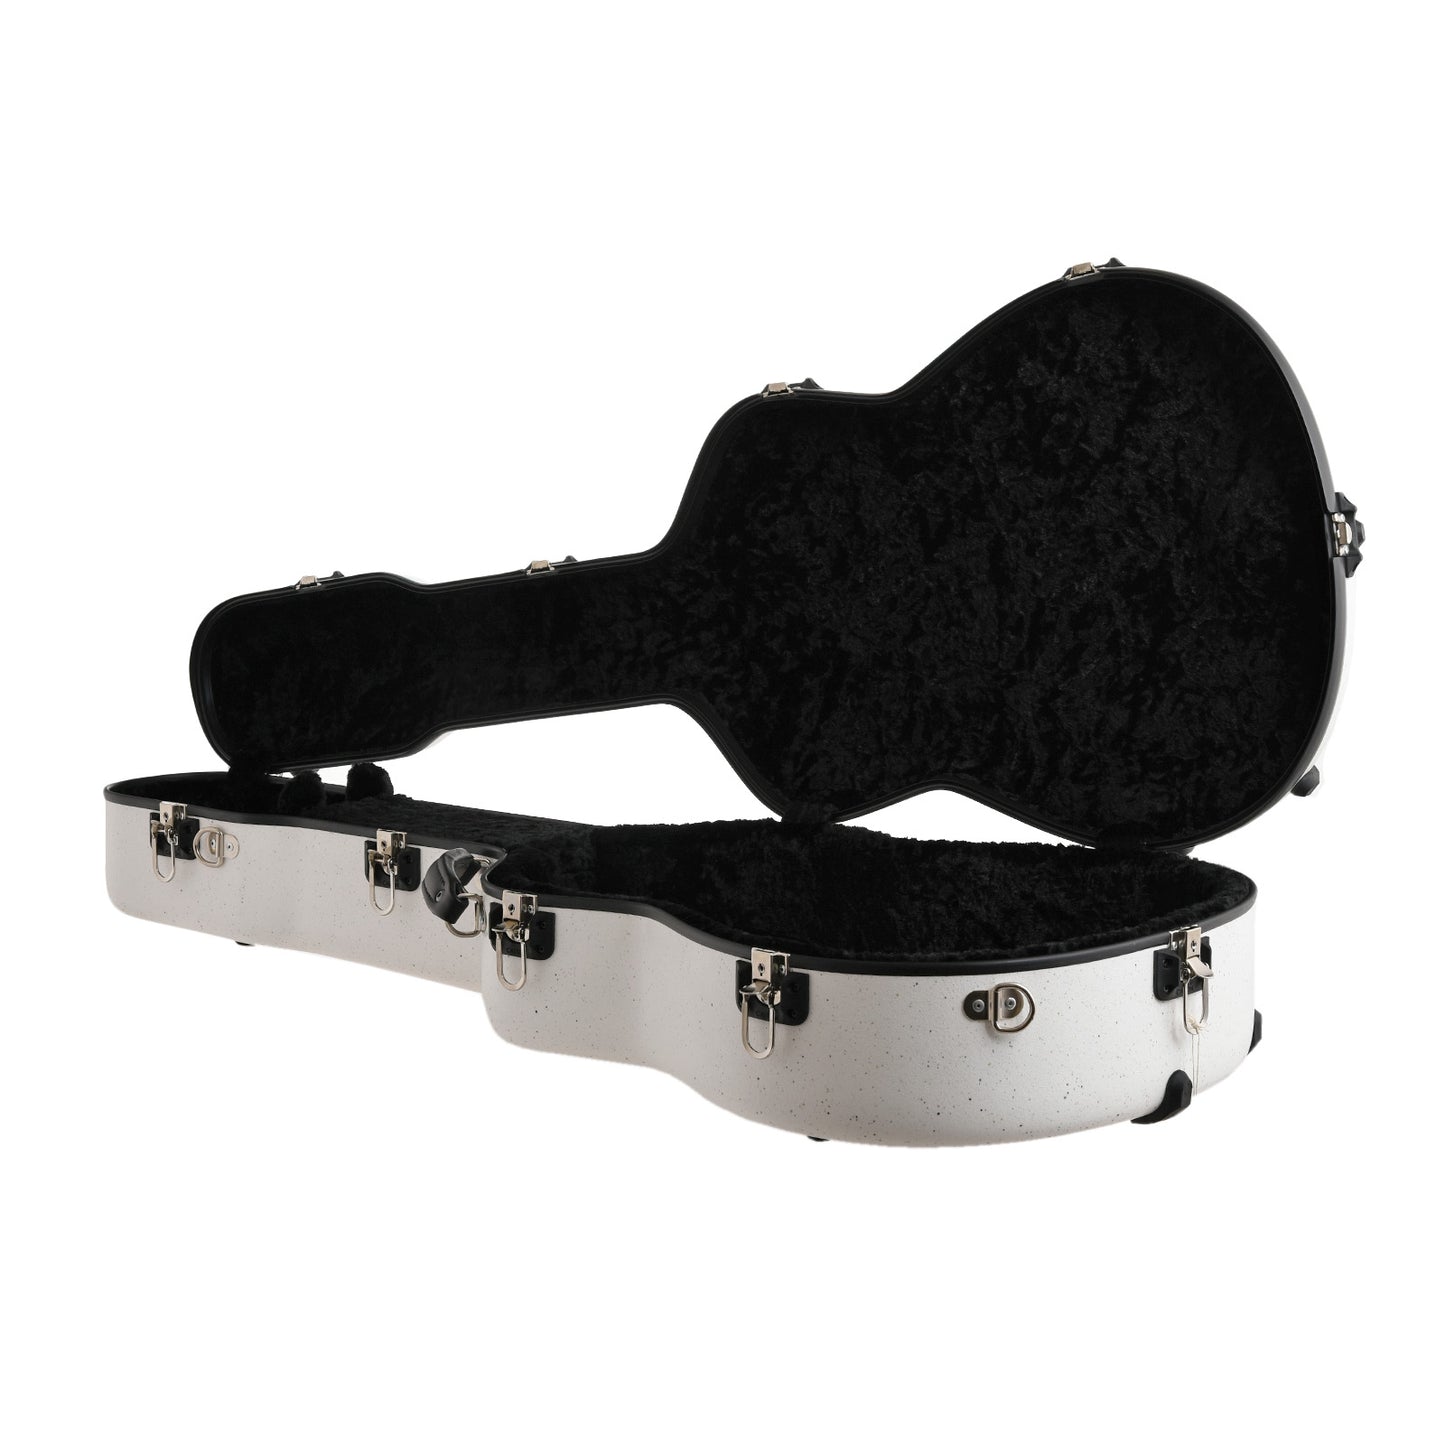 Image 2 of Calton Deluxe Guitar Case, Martin & Collings 14-Fret Dreadnought - White Granite with Black Lining - SKU# CGC1-GW/BK : Product Type Accessories & Parts : Elderly Instruments